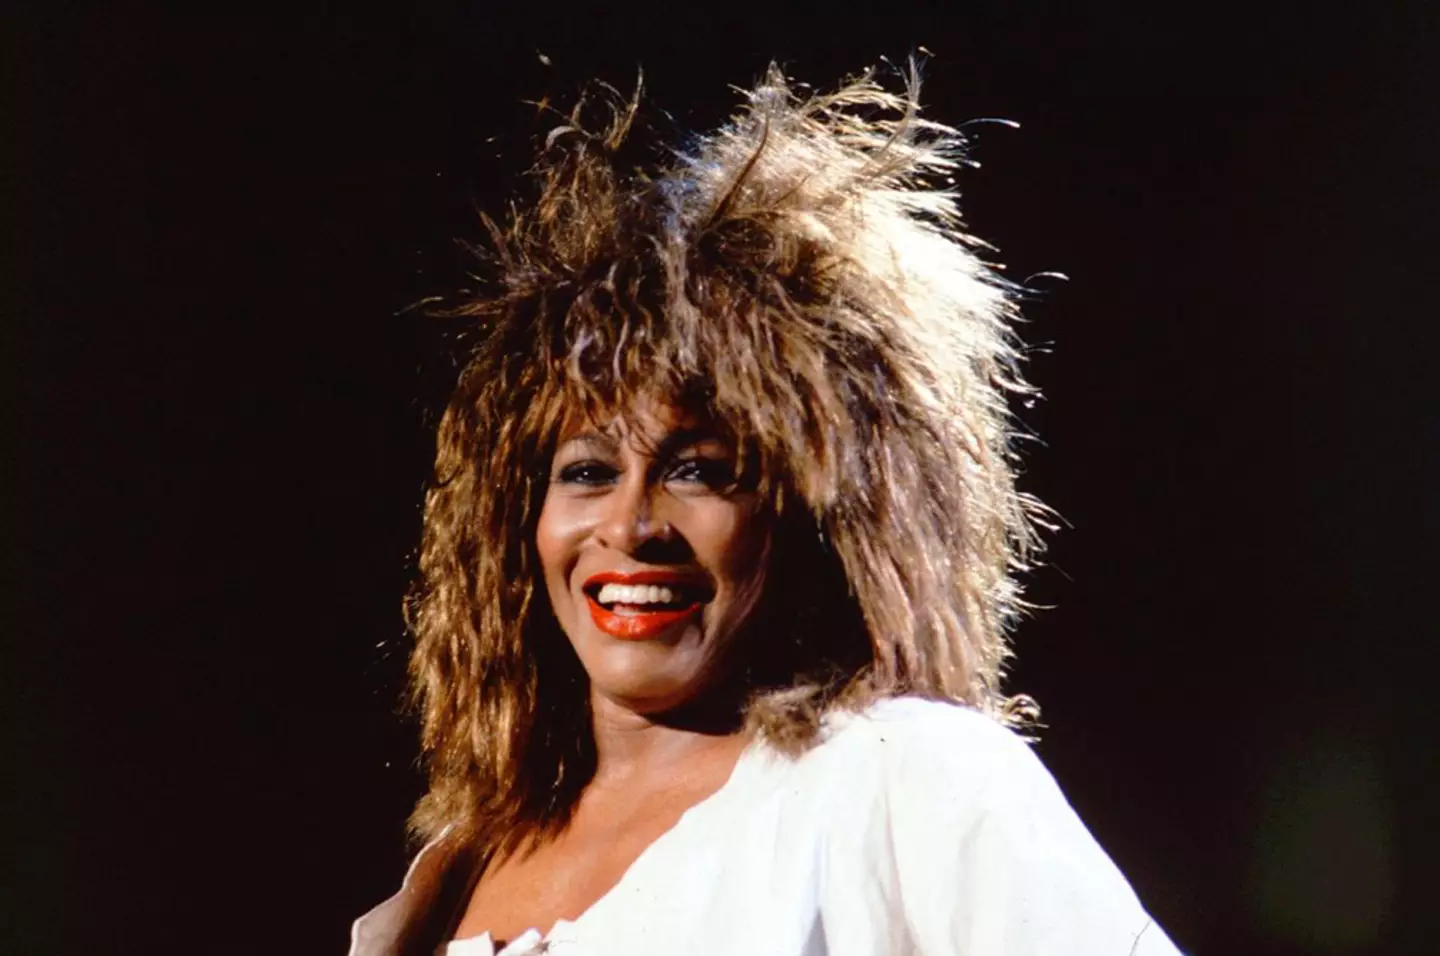 Tina Turner's cause of death has been confirmed.